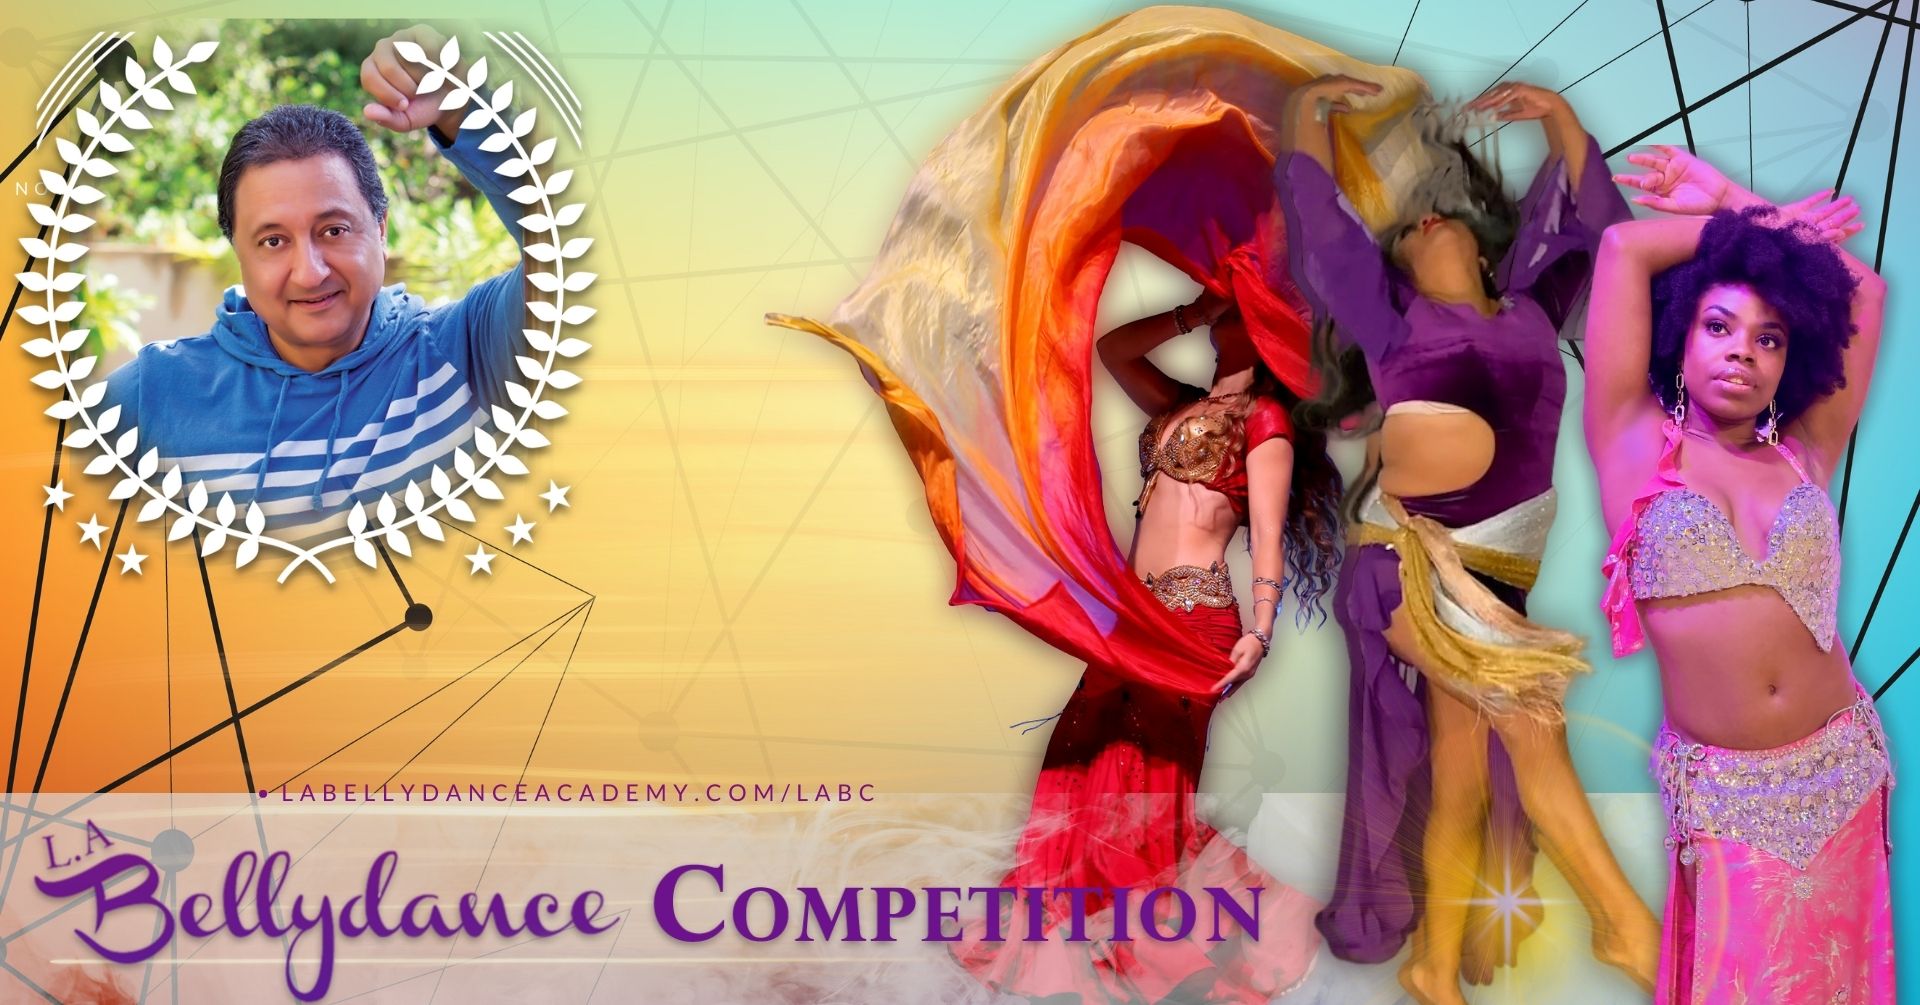 competition for bellydancers